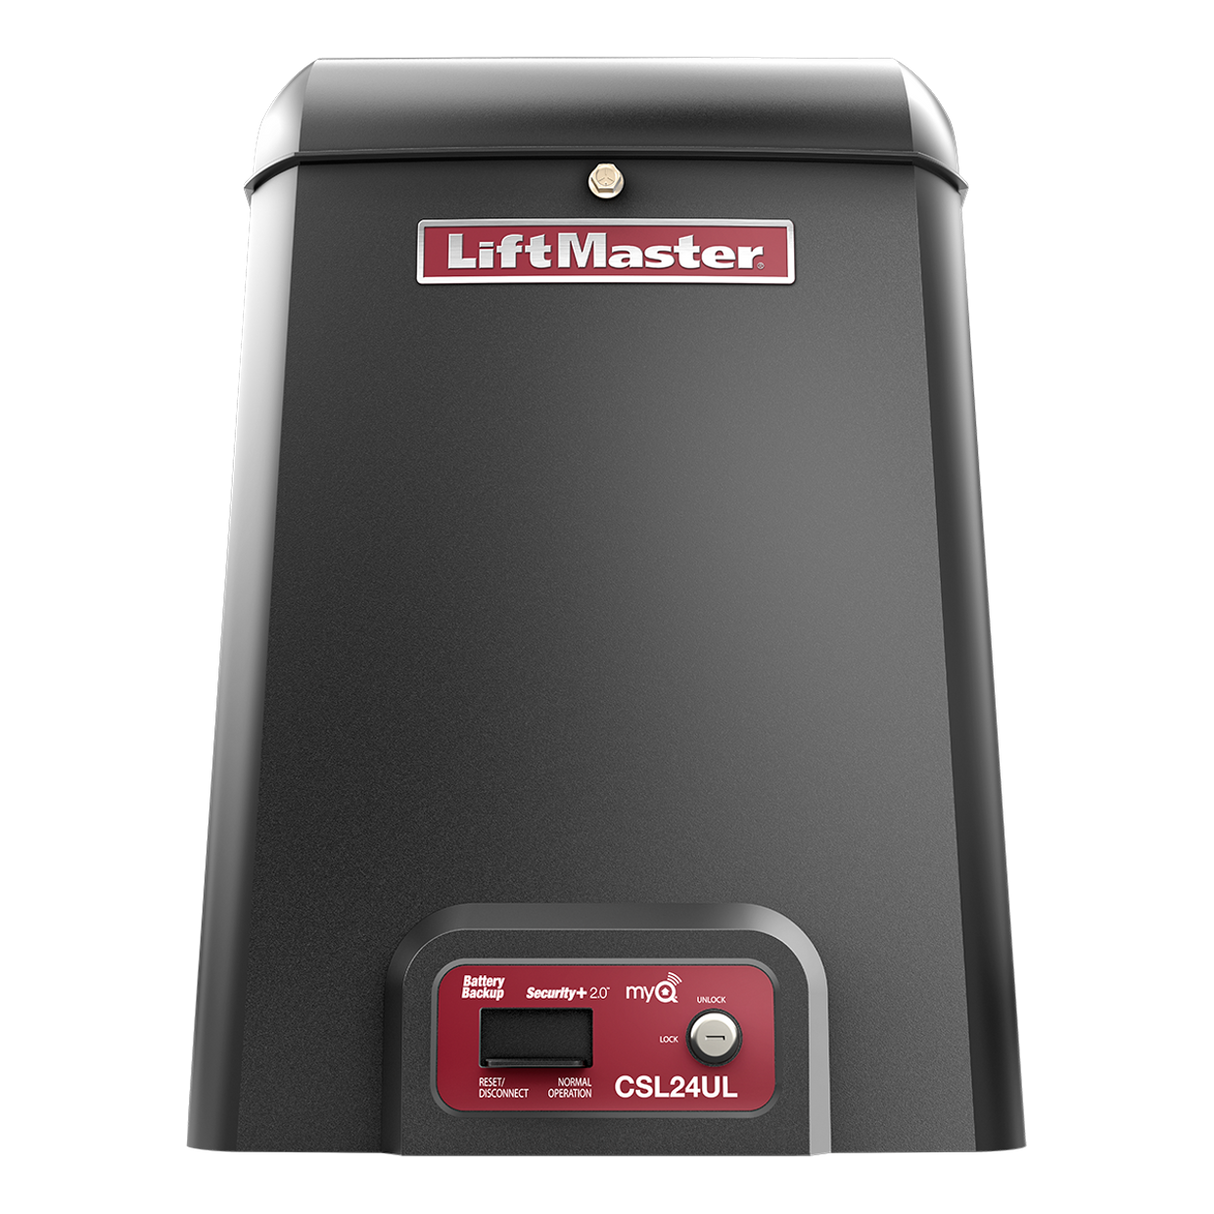 Liftmaster CSL24UL (front view)